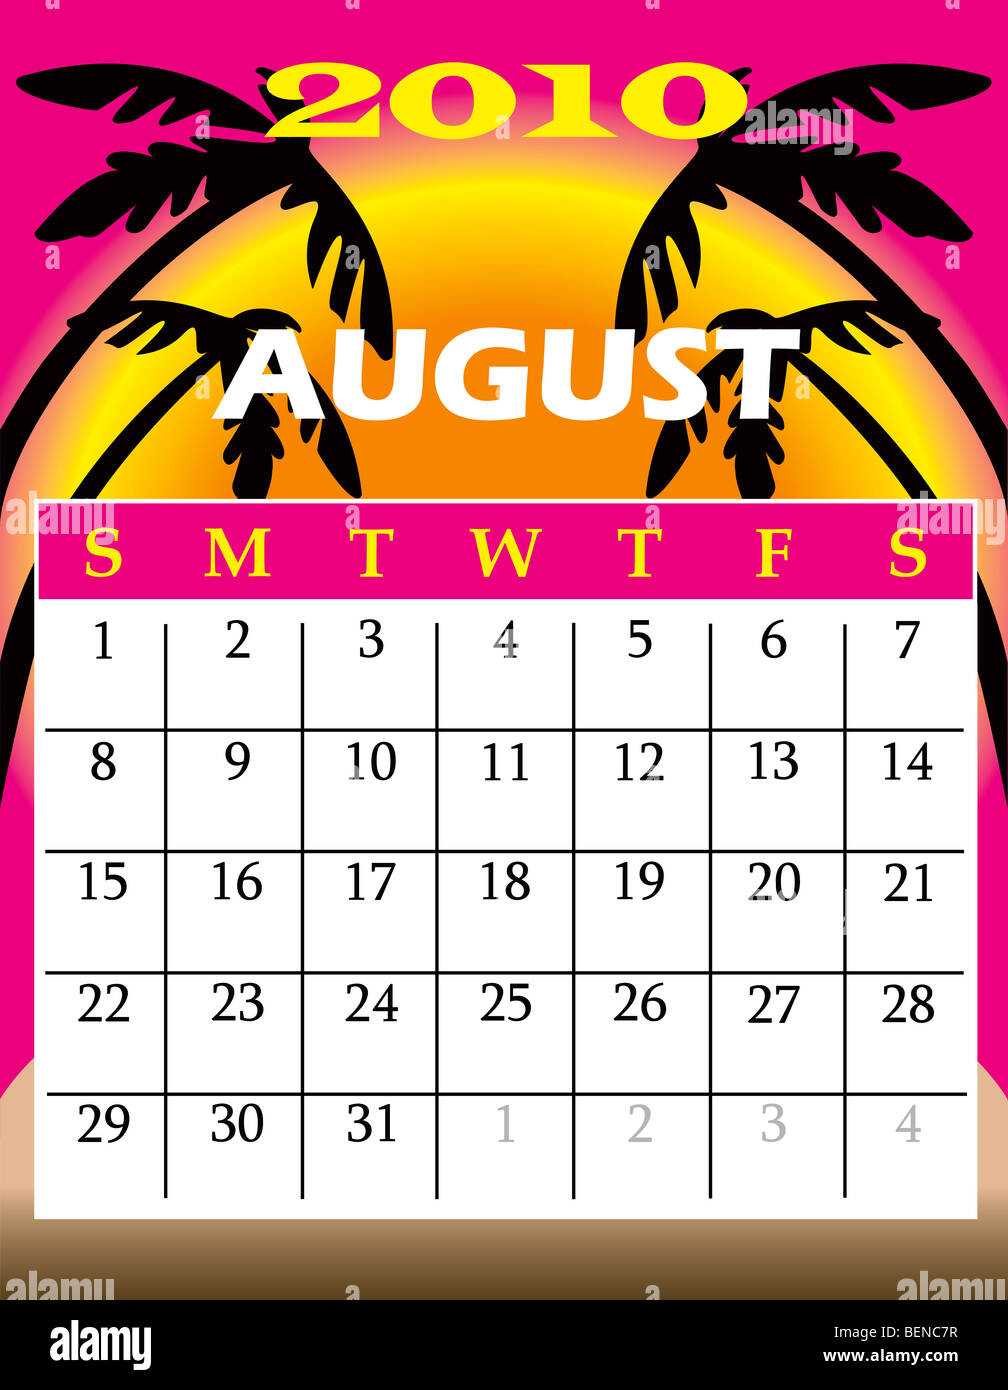 Vector Illustration of 2010 Calendar with a monthly, I have all 12 months designed seperately or all 12 months in a single desig Stock Photo